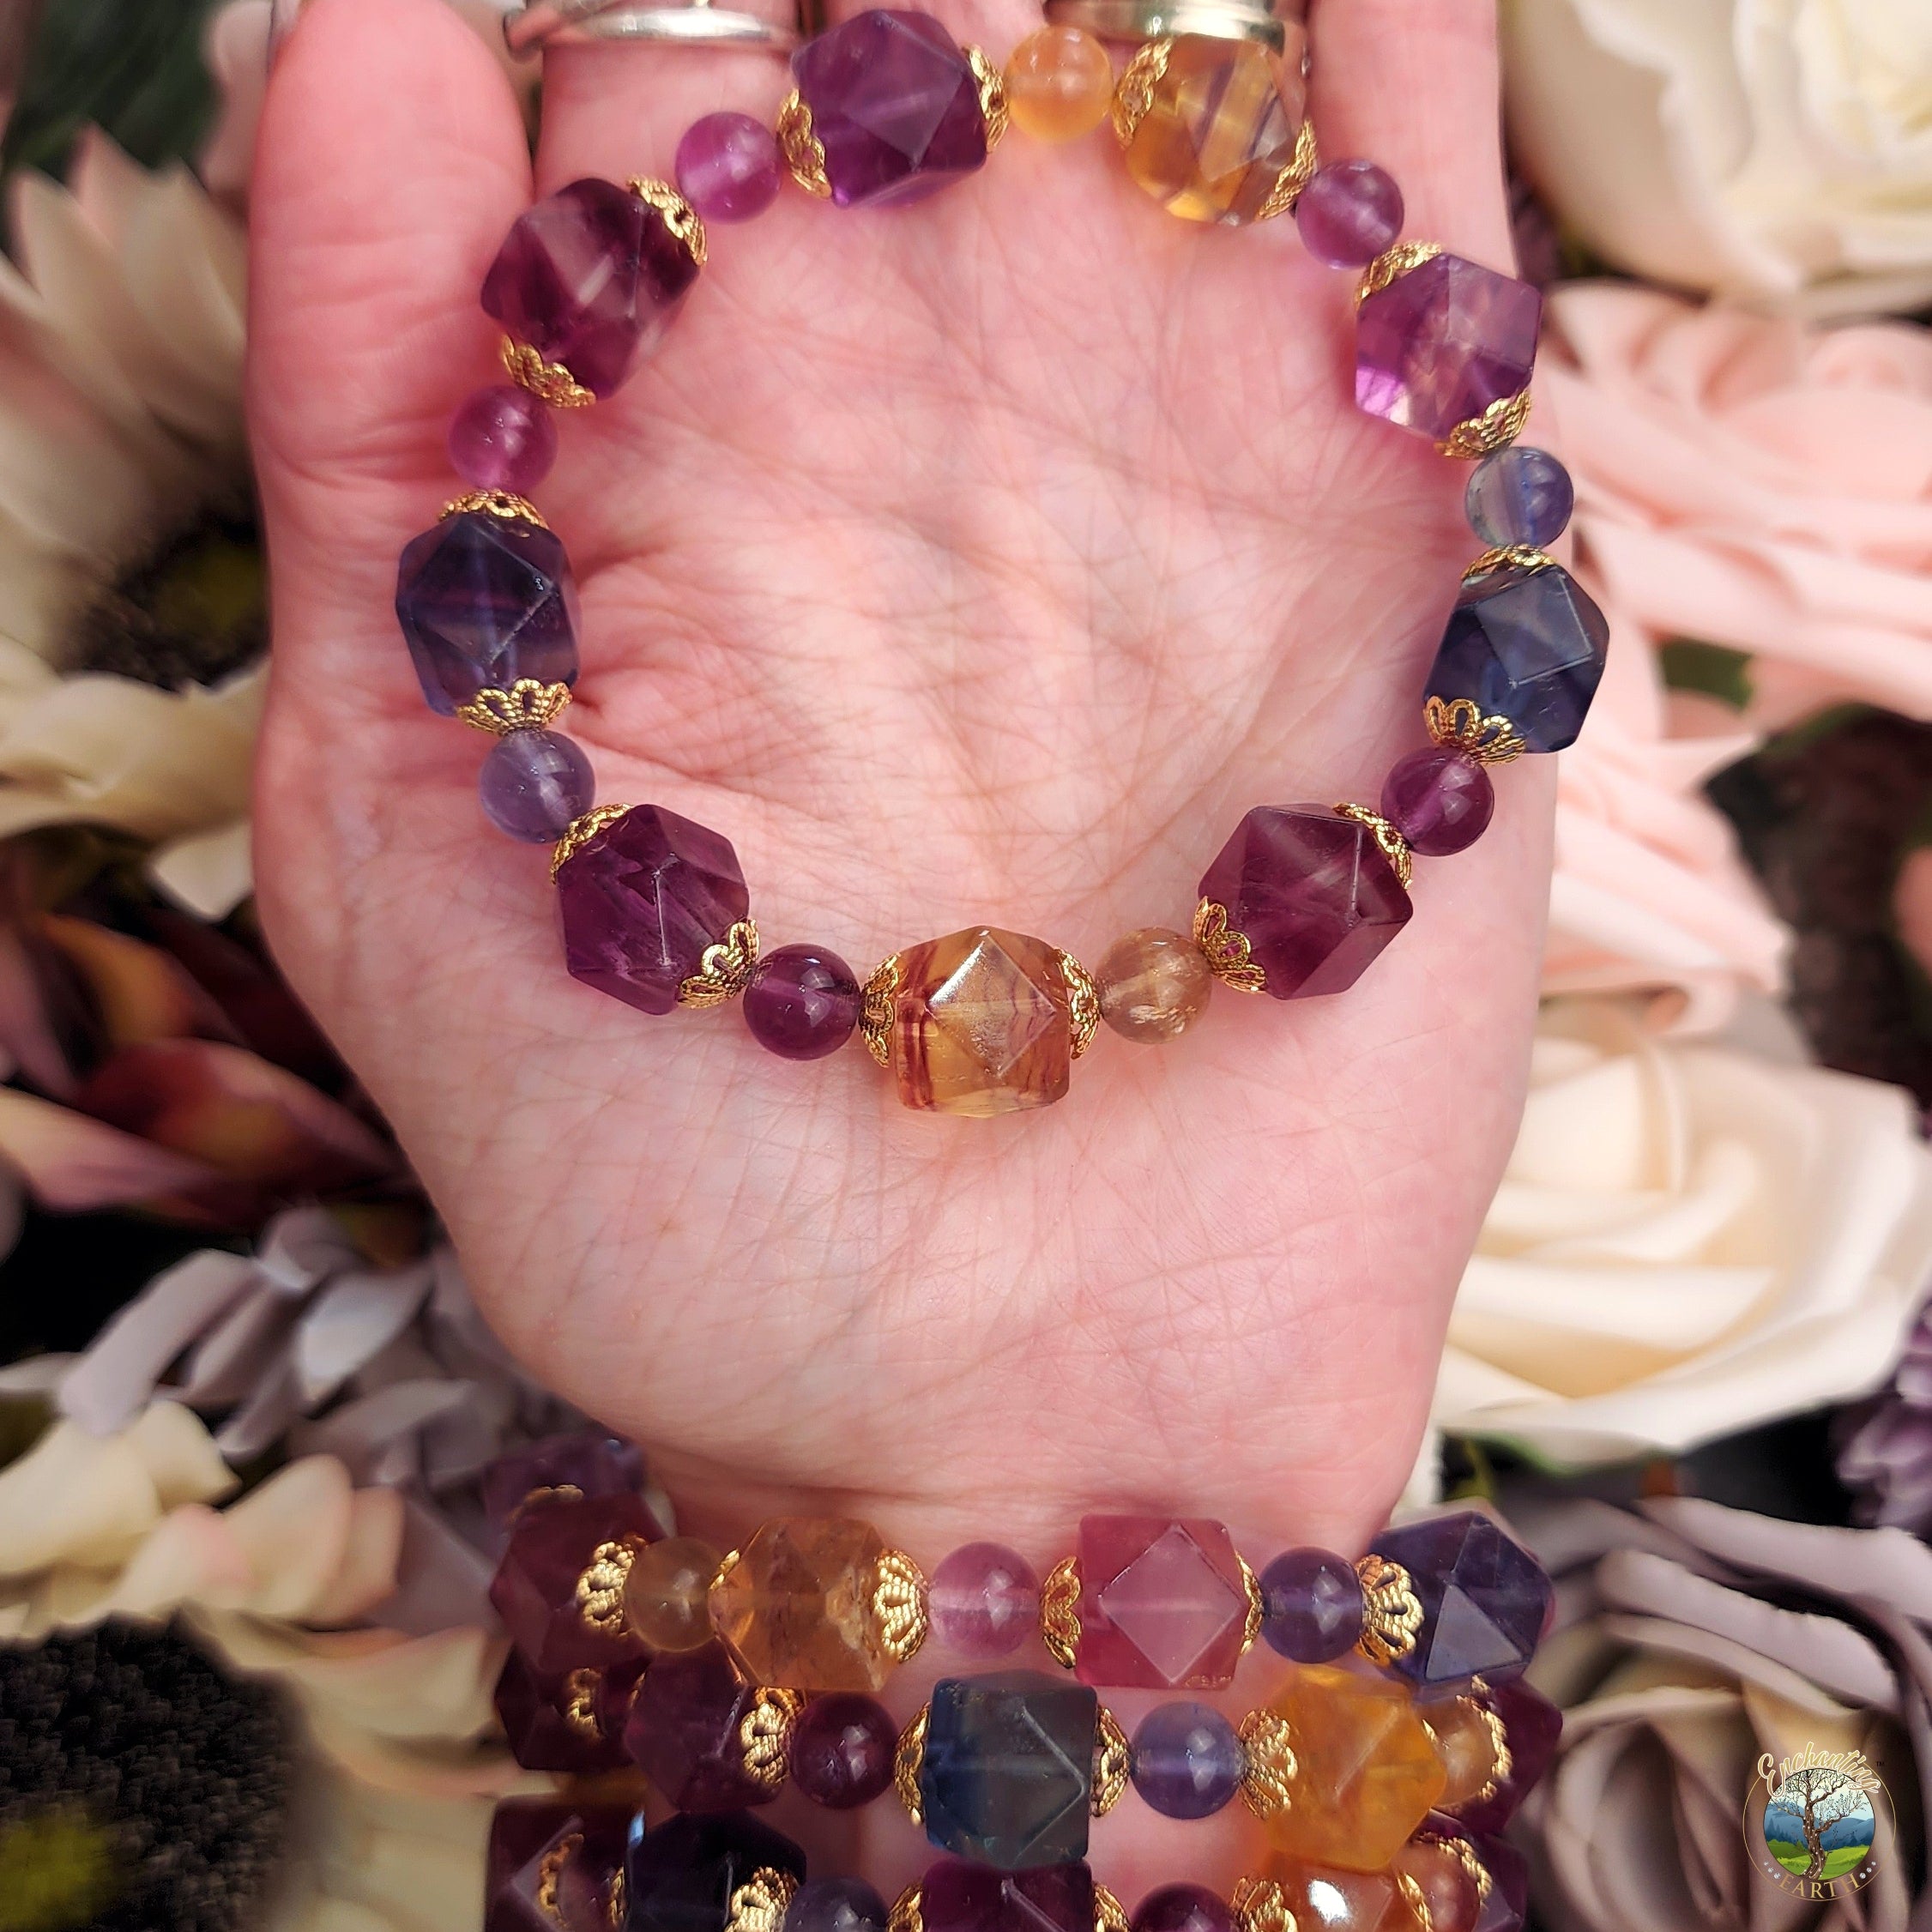 Fluorite Dodecahedron Bracelet for Focus, Learning and Mental Clarity